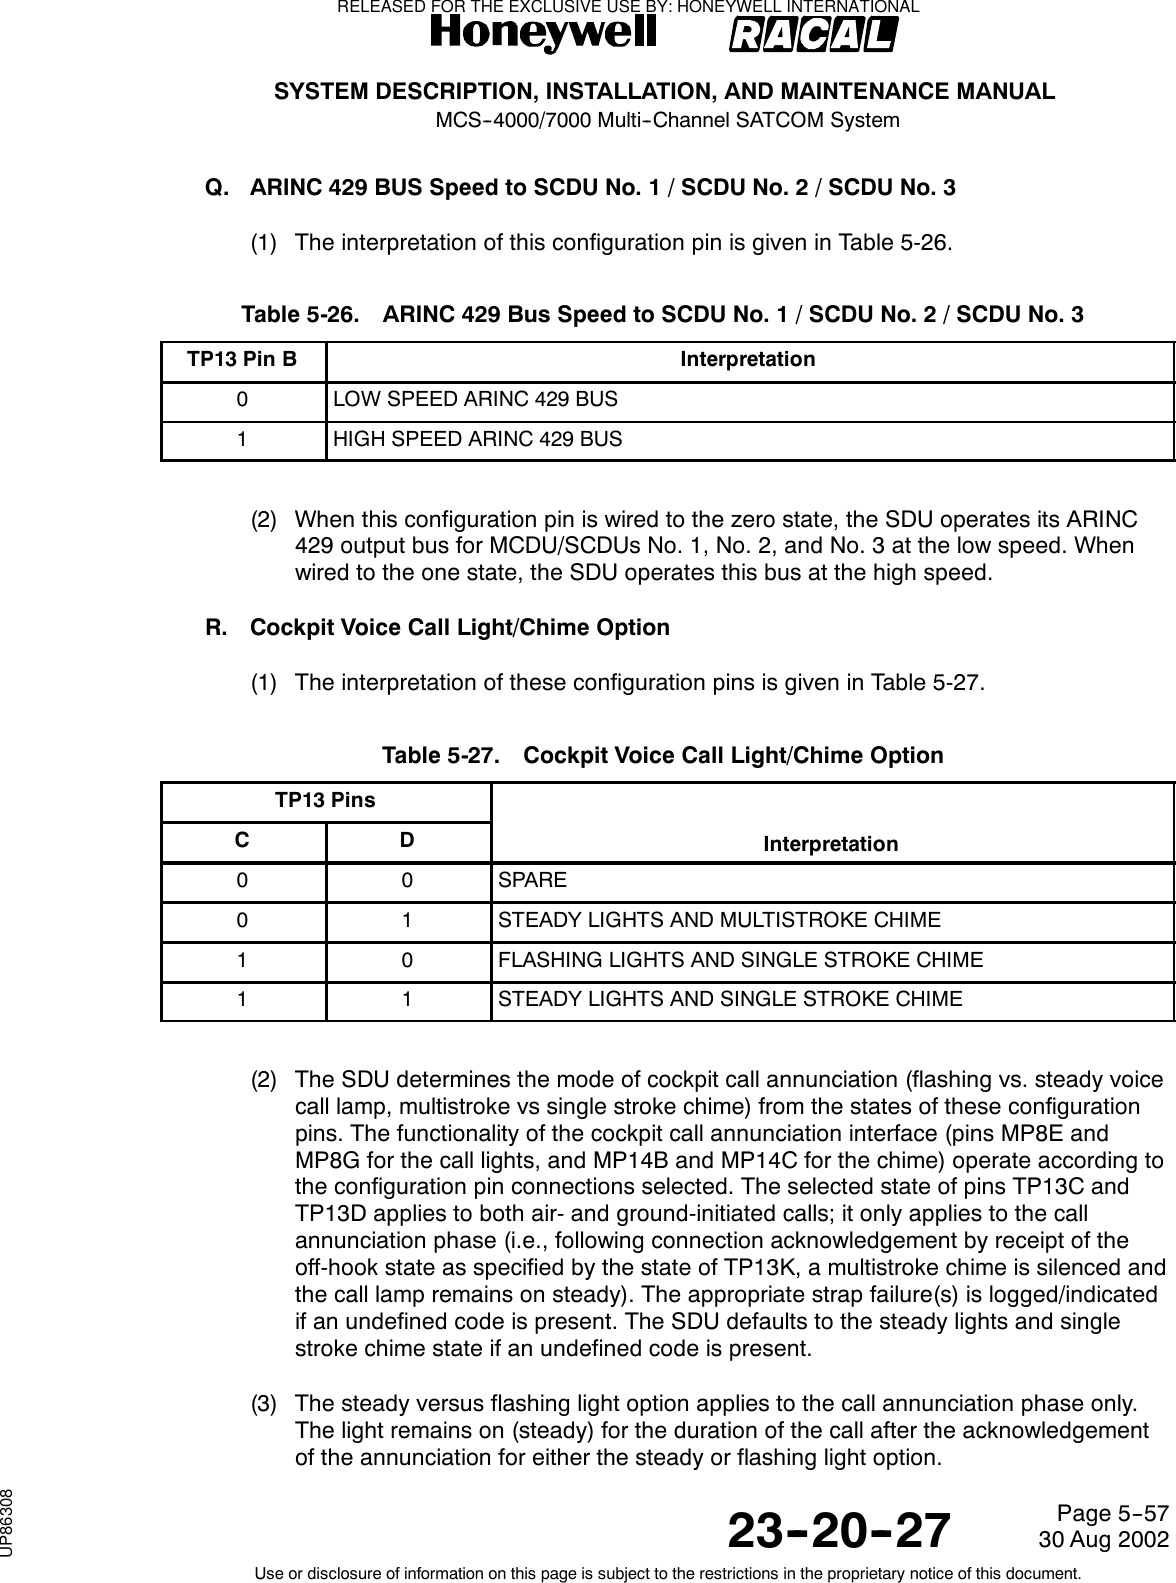 SYSTEM DESCRIPTION, INSTALLATION, AND MAINTENANCE MANUALMCS--4000/7000 Multi--Channel SATCOM System23--20--2730 Aug 2002Use or disclosure of information on this page is subject to the restrictions in the proprietary notice of this document.Page 5--57Q. ARINC 429 BUS Speed to SCDU No. 1 / SCDU No. 2 / SCDU No. 3(1) The interpretation of this configuration pin is given in Table 5-26.Table 5-26. ARINC 429 Bus Speed to SCDU No. 1 / SCDU No. 2 / SCDU No. 3TP13 Pin B Interpretation0LOW SPEED ARINC 429 BUS1HIGH SPEED ARINC 429 BUS(2) When this configuration pin is wired to the zero state, the SDU operates its ARINC429 output bus for MCDU/SCDUs No. 1, No. 2, and No. 3 at the low speed. Whenwired to the one state, the SDU operates this bus at the high speed.R. Cockpit Voice Call Light/Chime Option(1) The interpretation of these configuration pins is given in Table 5-27.Table 5-27. Cockpit Voice Call Light/Chime OptionTP13 PinsC D Interpretation0 0 SPARE0 1 STEADY LIGHTS AND MULTISTROKE CHIME1 0 FLASHING LIGHTS AND SINGLE STROKE CHIME1 1 STEADY LIGHTS AND SINGLE STROKE CHIME(2) The SDU determines the mode of cockpit call annunciation (flashing vs. steady voicecall lamp, multistroke vs single stroke chime) from the states of these configurationpins. The functionality of the cockpit call annunciation interface (pins MP8E andMP8G for the call lights, and MP14B and MP14C for the chime) operate according tothe configuration pin connections selected. The selected state of pins TP13C andTP13D applies to both air- and ground-initiated calls; it only applies to the callannunciation phase (i.e., following connection acknowledgement by receipt of theoff-hook state as specified by the state of TP13K, a multistroke chime is silenced andthe call lamp remains on steady). The appropriate strap failure(s) is logged/indicatedif an undefined code is present. The SDU defaults to the steady lights and singlestroke chime state if an undefined code is present.(3) The steady versus flashing light option applies to the call annunciation phase only.The light remains on (steady) for the duration of the call after the acknowledgementof the annunciation for either the steady or flashing light option.RELEASED FOR THE EXCLUSIVE USE BY: HONEYWELL INTERNATIONALUP86308